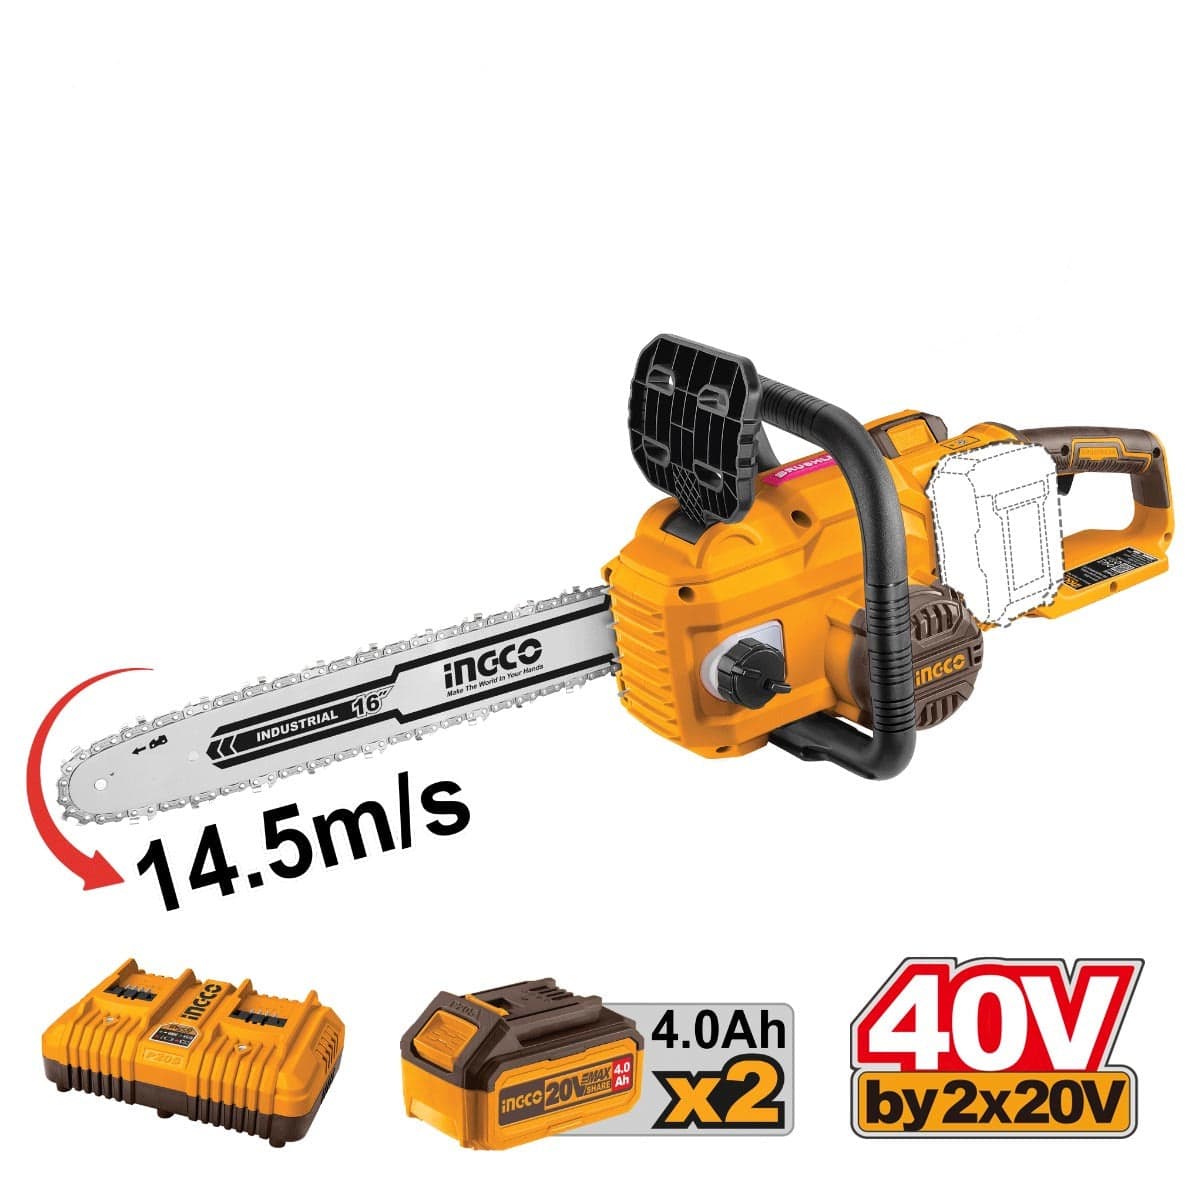 Ingco 16" Lithium-Ion Cordless Chain Saw - CGSLI401682 | Supply Master | Accra, Ghana Chainsaw Buy Tools hardware Building materials